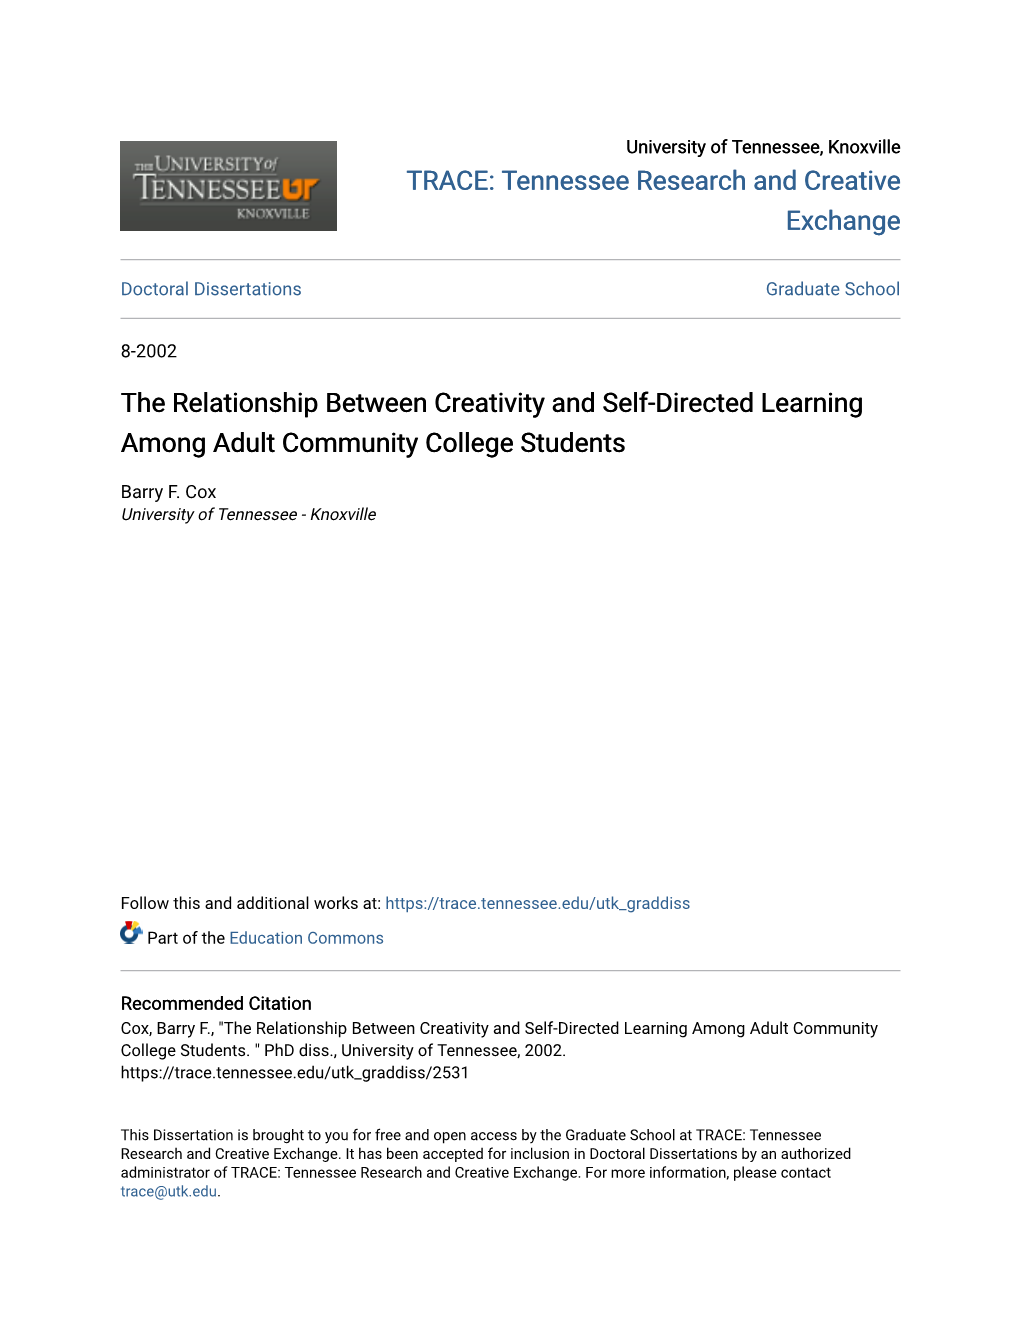 The Relationship Between Creativity and Self-Directed Learning Among Adult Community College Students